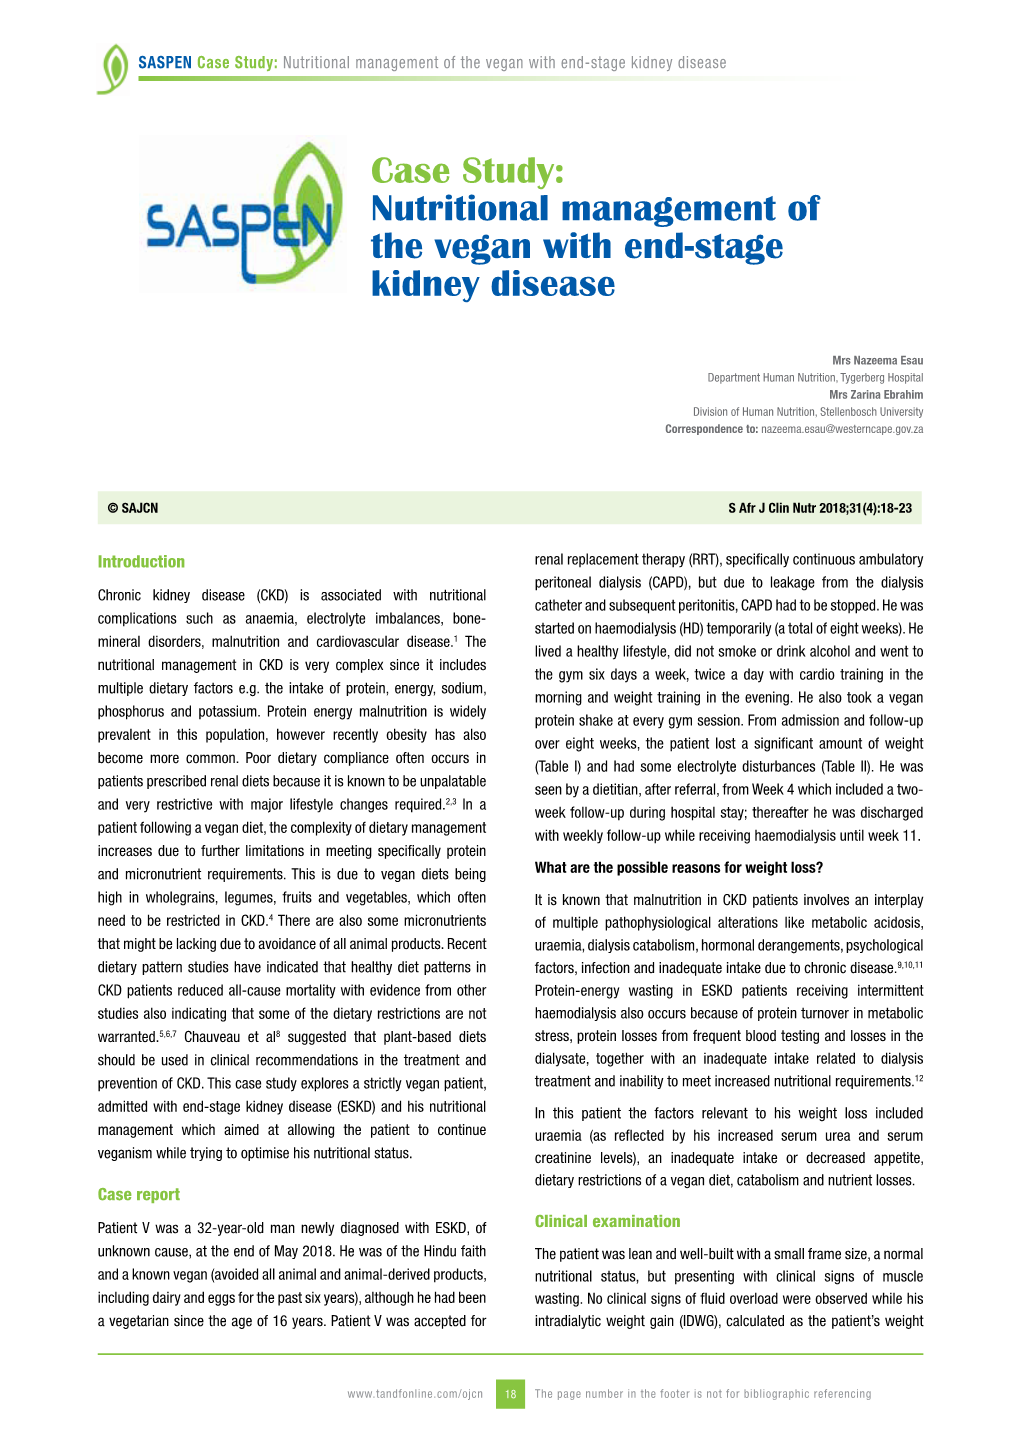 Nutritional Management of the Vegan with End-Stage Kidney Disease